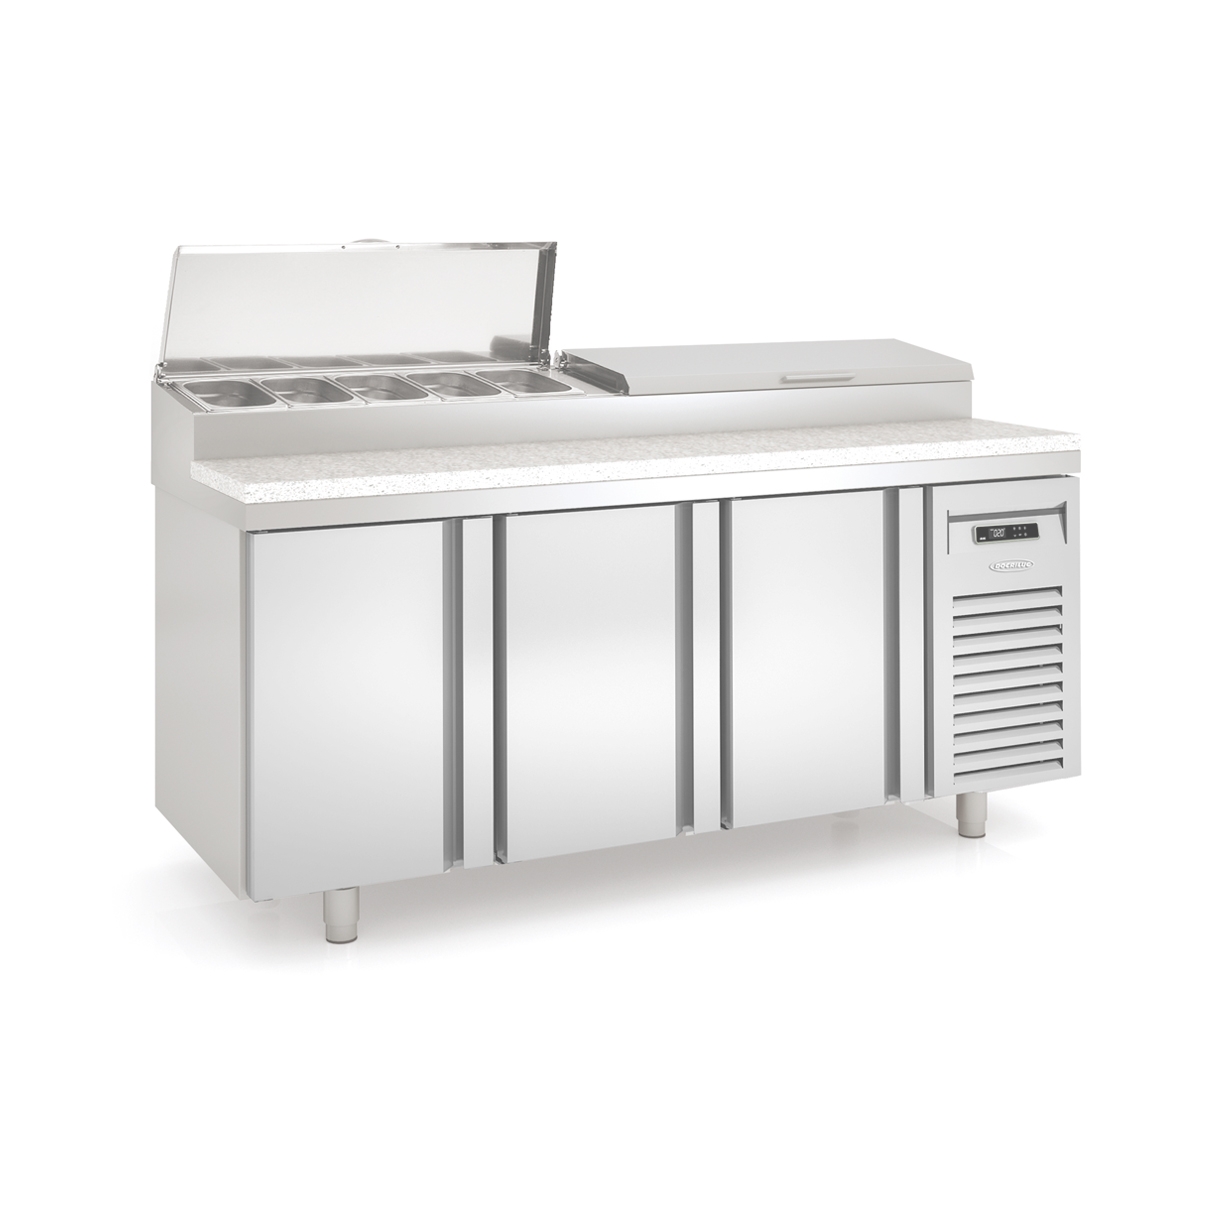 Grastronorm 1/1 Refrigerated Table for Food Preparation MEI-70